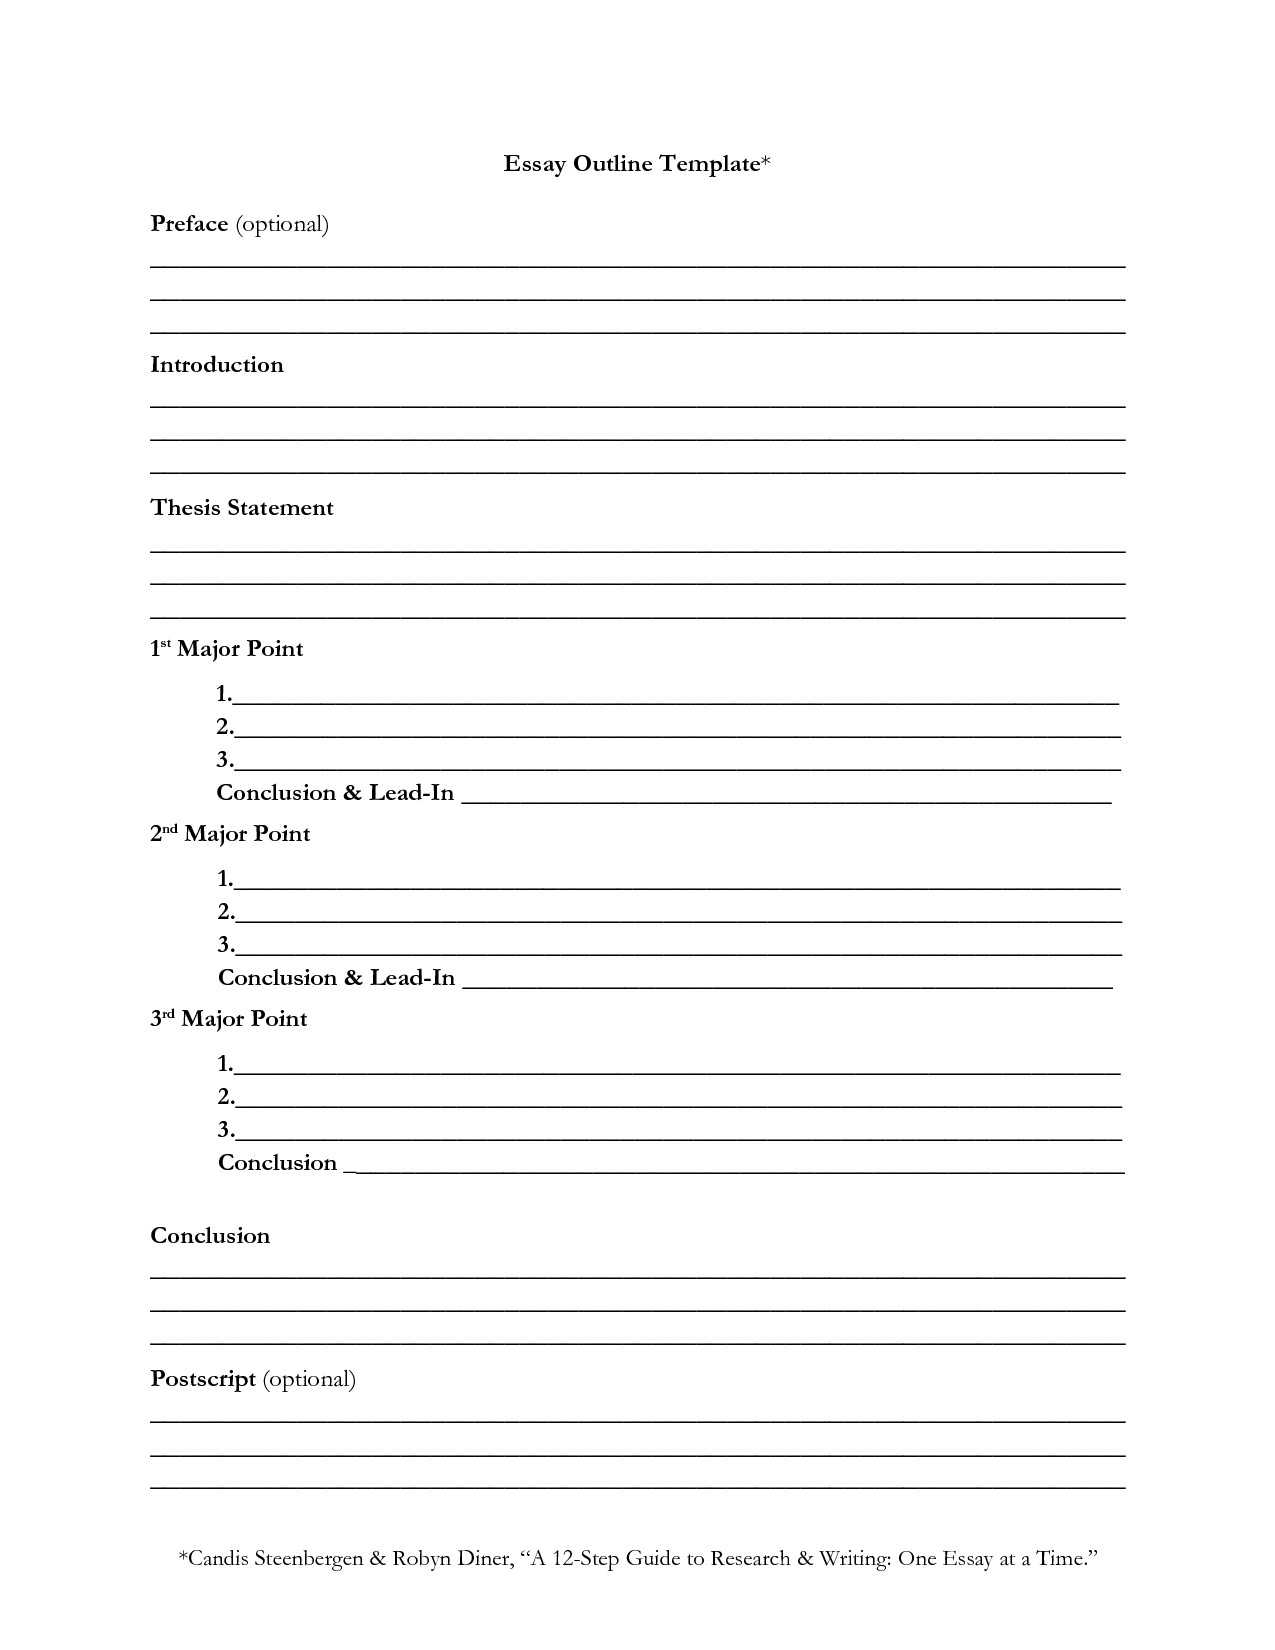 Supreme Court Cases Worksheet Answers with 32 Awesome Pics Supreme Court Cases Worksheet Answers